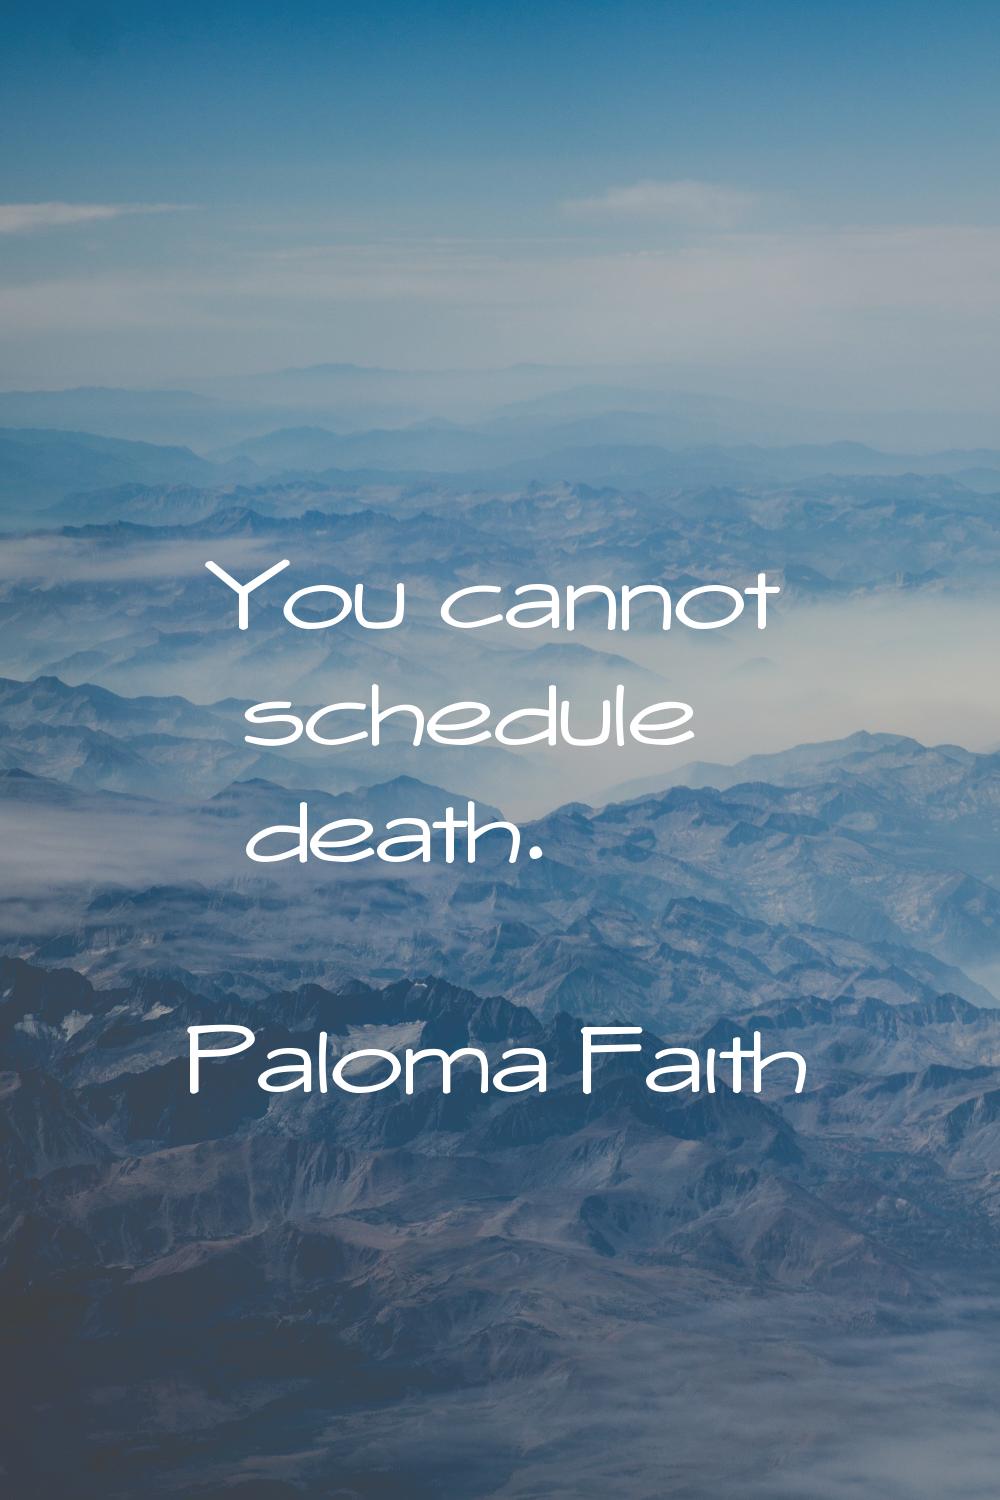 You cannot schedule death.